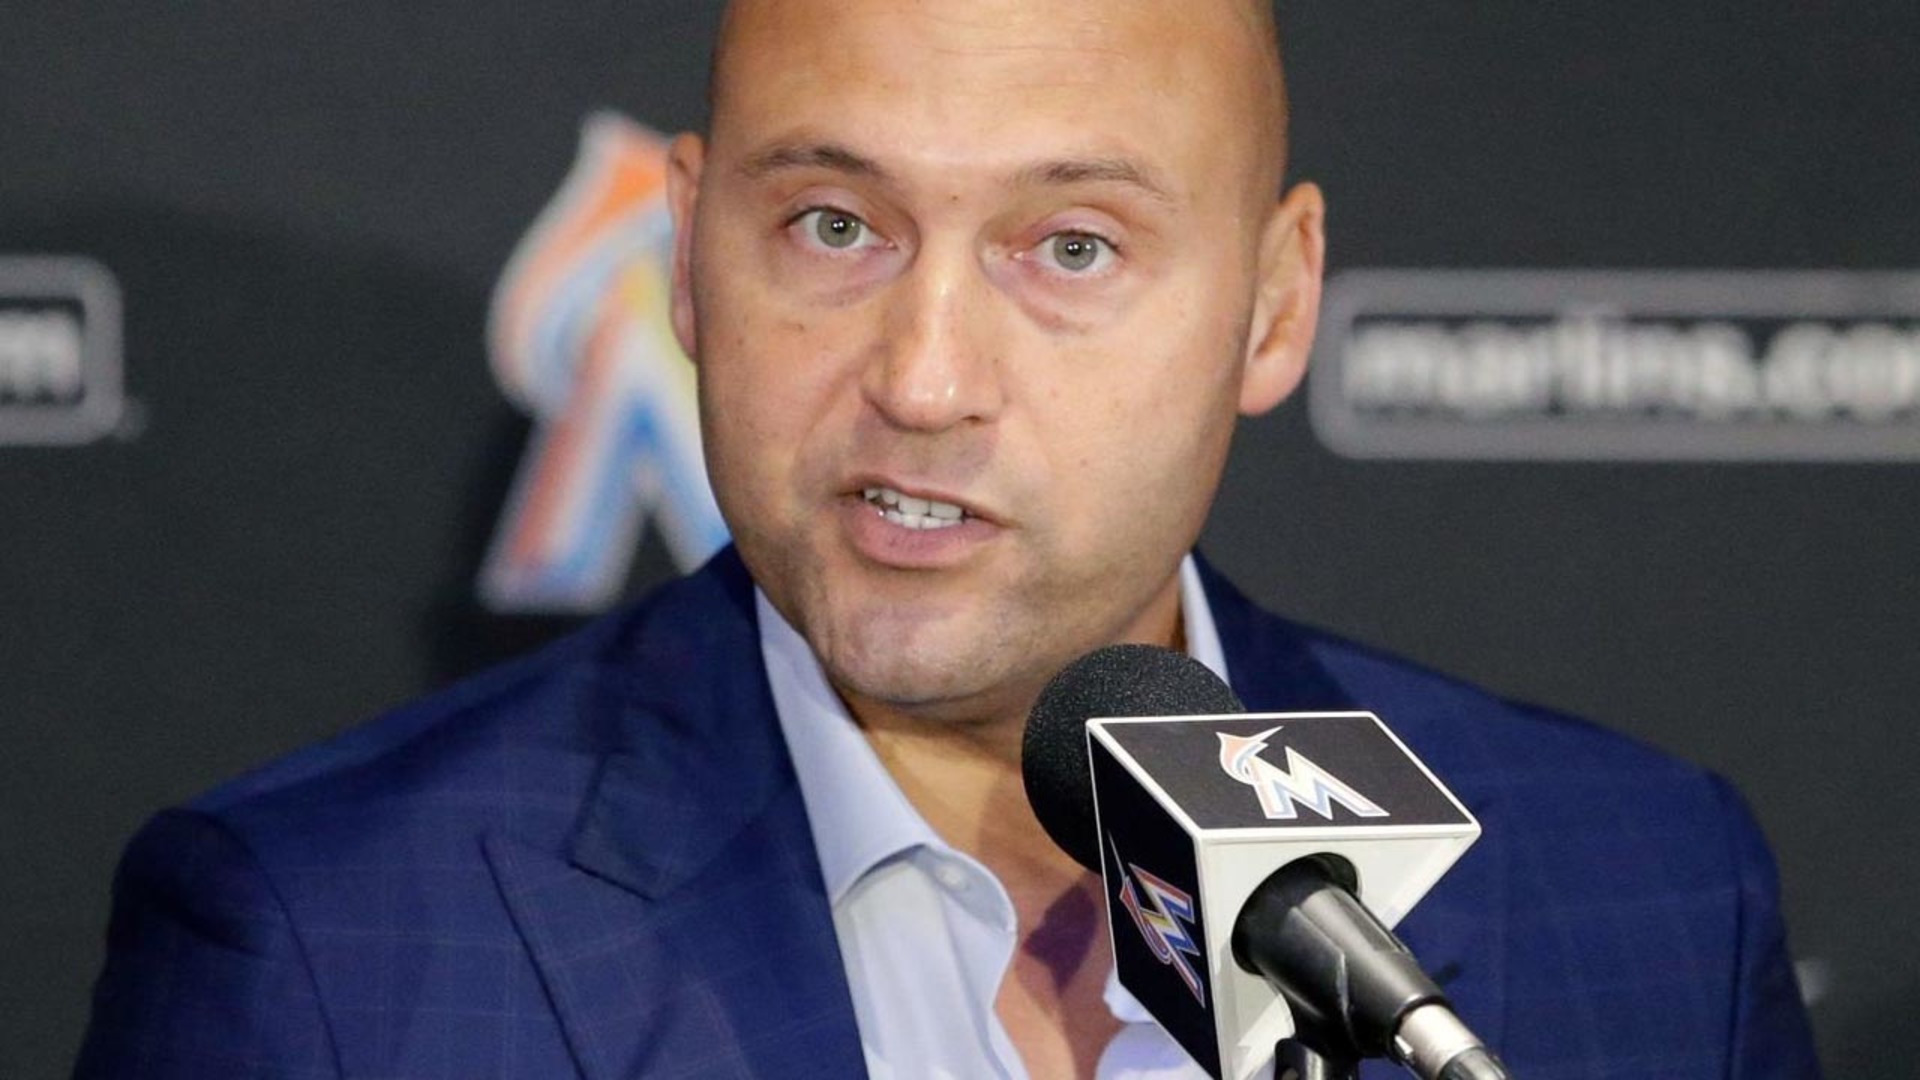 Derek Jeter FIRES Marlins Scout While He Was Still in the Hospital After Cancer Surgery!